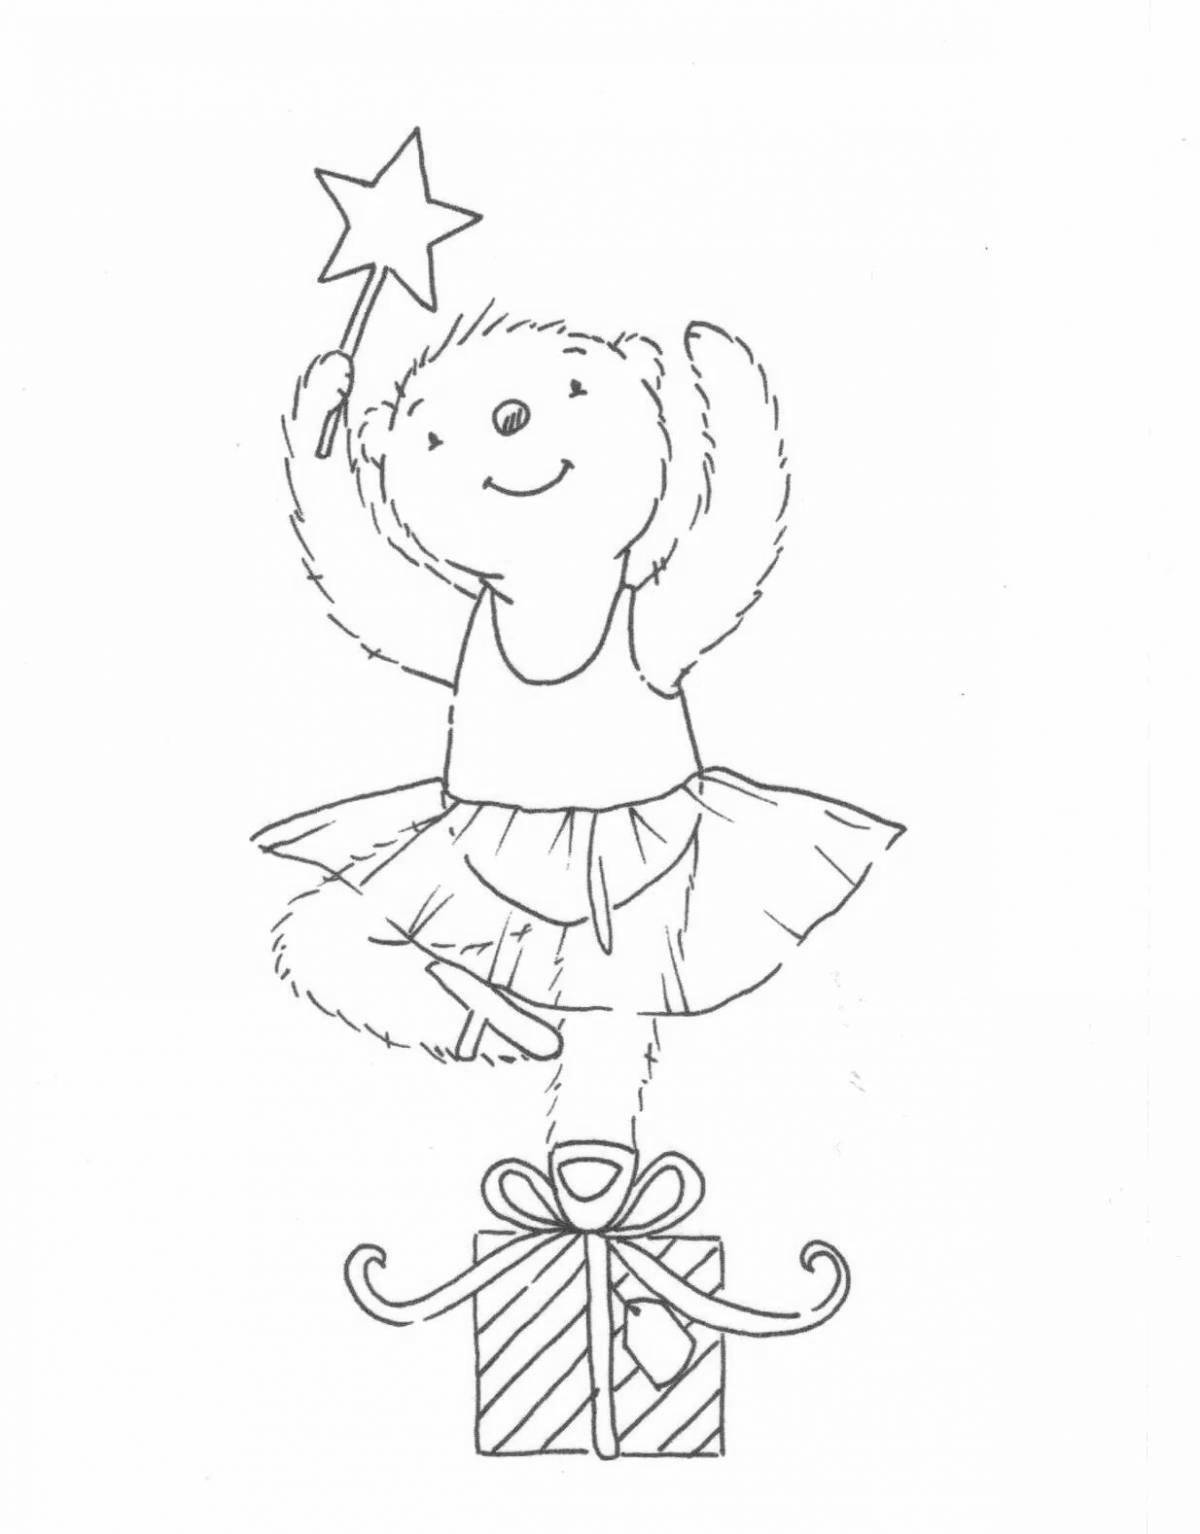 Coloring page funny ballerina cat